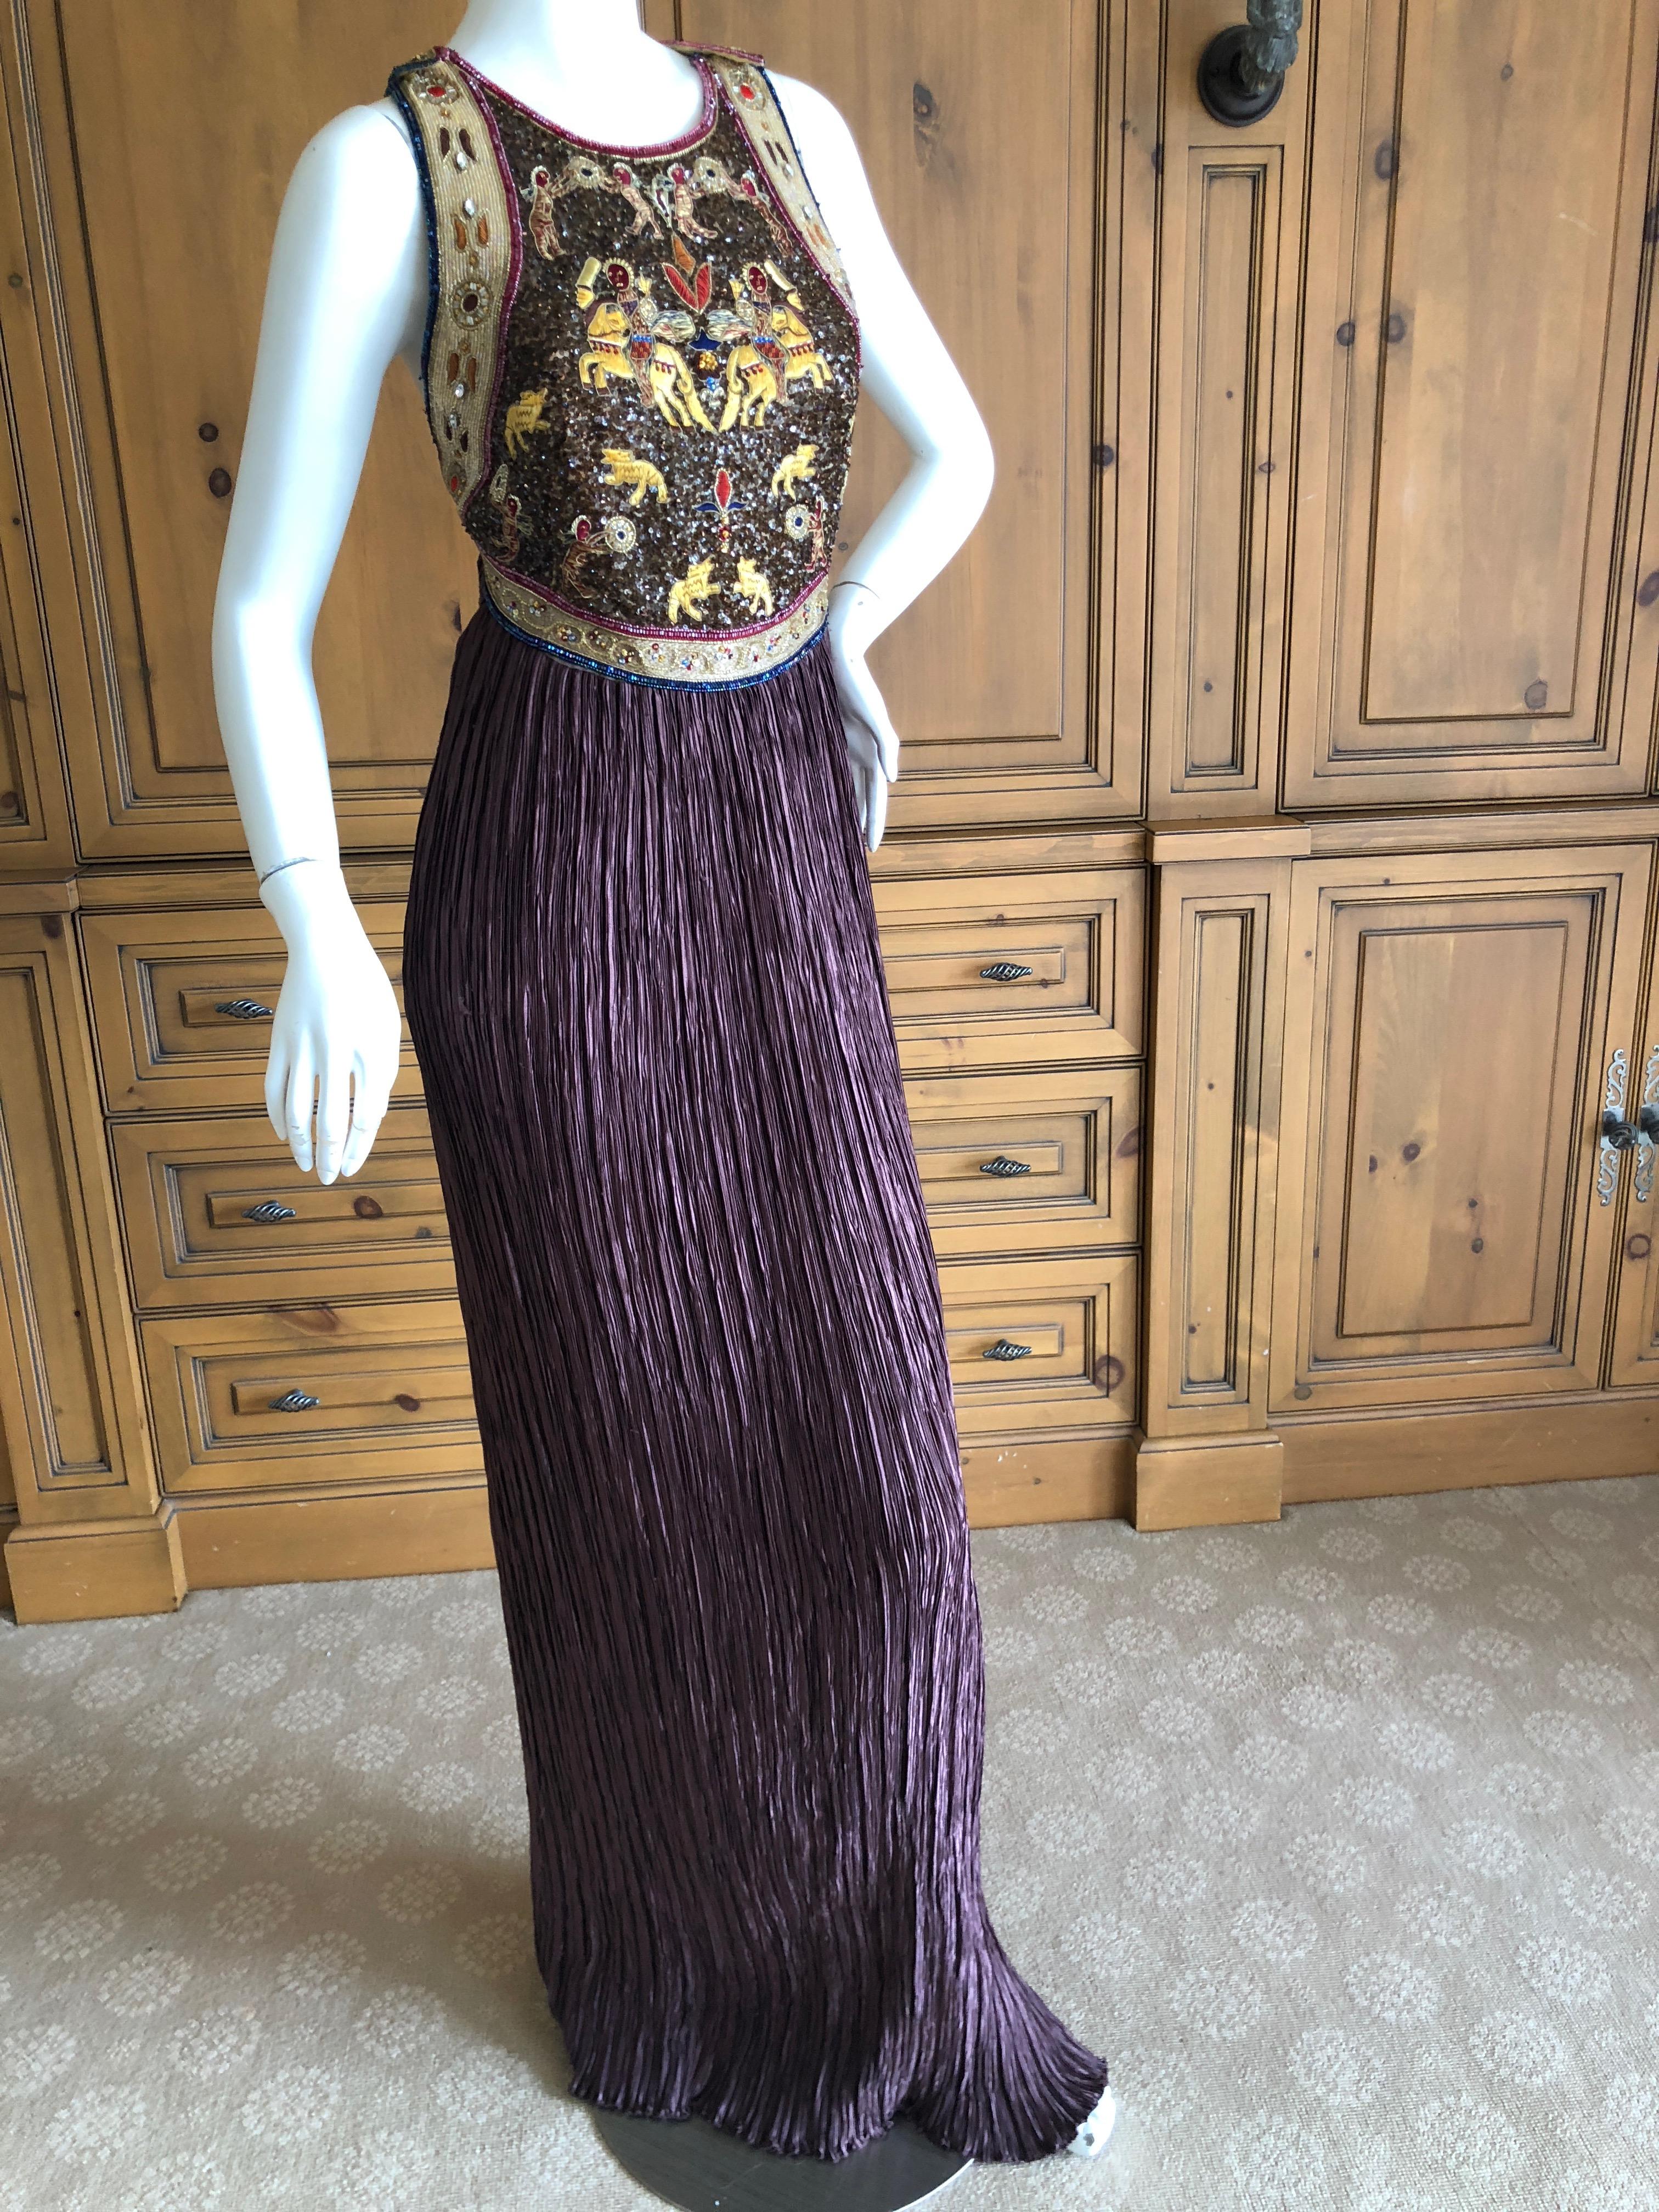 Mary McFadden Couture for Neiman Marcus Plisse Pleated Sleeveless Evening Dress with Folkloric Embroidery.
Please use the zoom feature to see the details.
Size 6
Bust 38